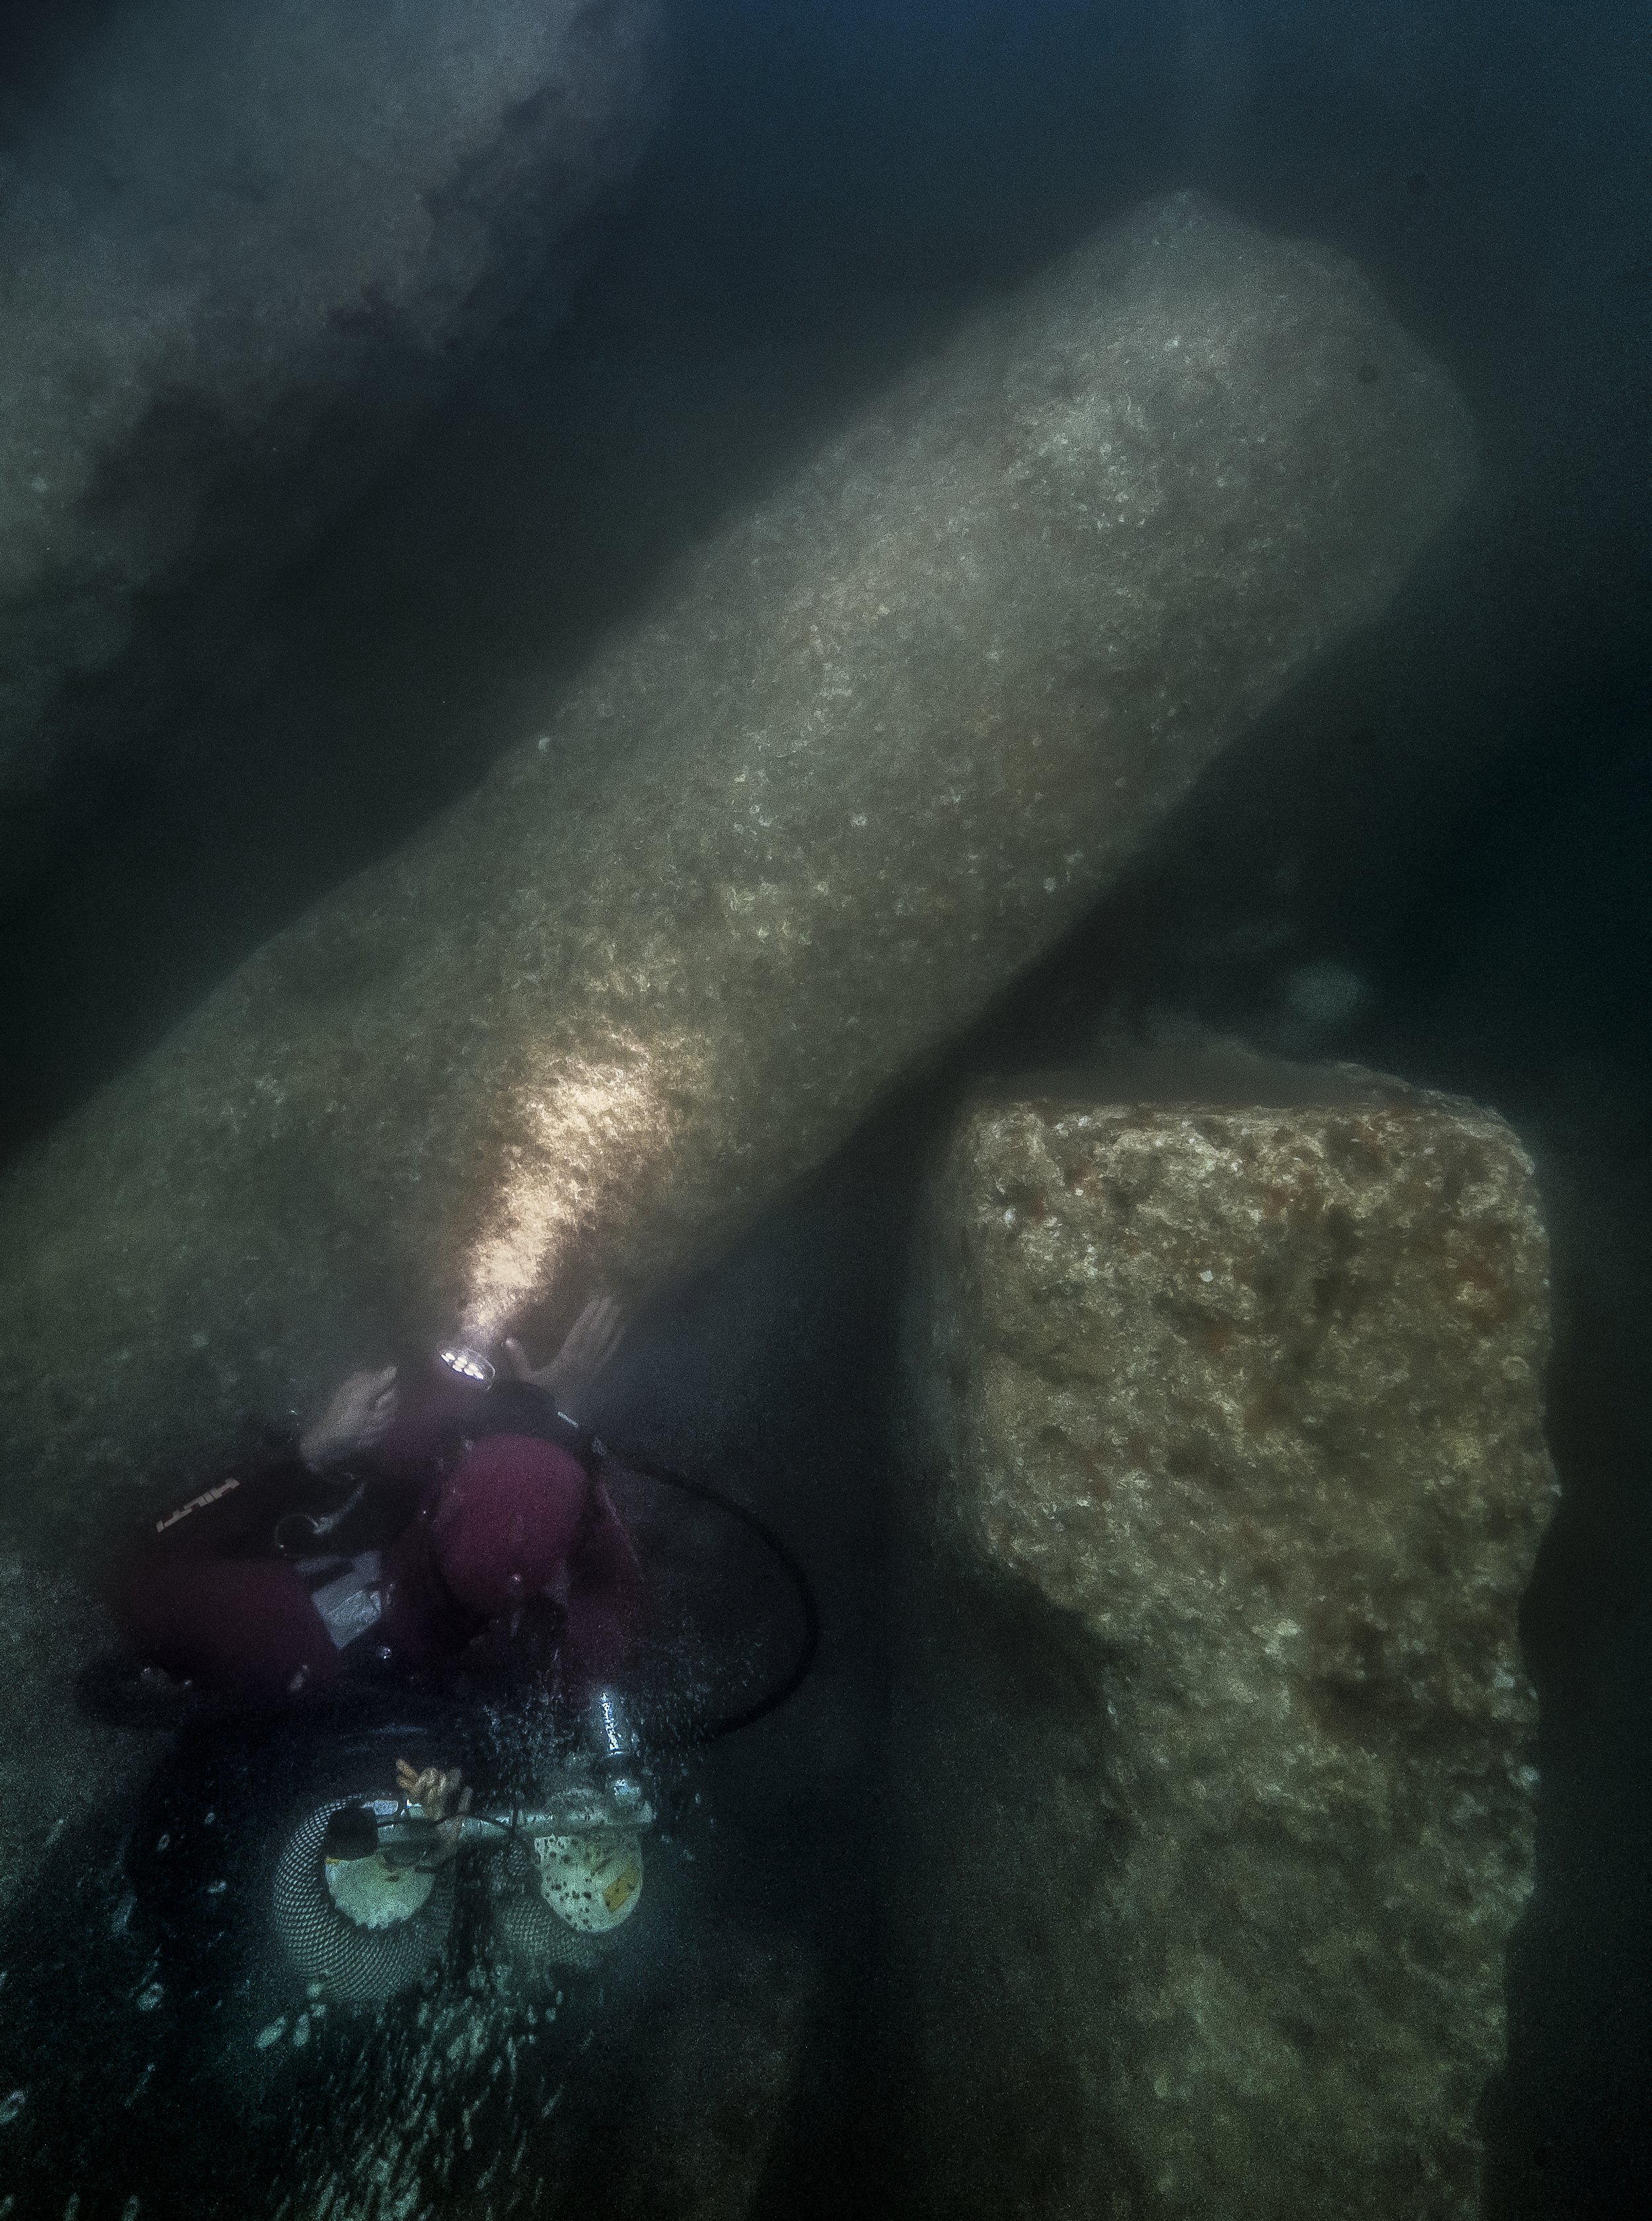  After excavation, an archaeological diver gazes at the huge blocks of the Amun temple, which fell in the mid-second century BC in the South canal of Thonis-Heracleion. They were discovered under 3 m of hard clay.&nbsp;  ©Franck Goddio/Hilti Foundati